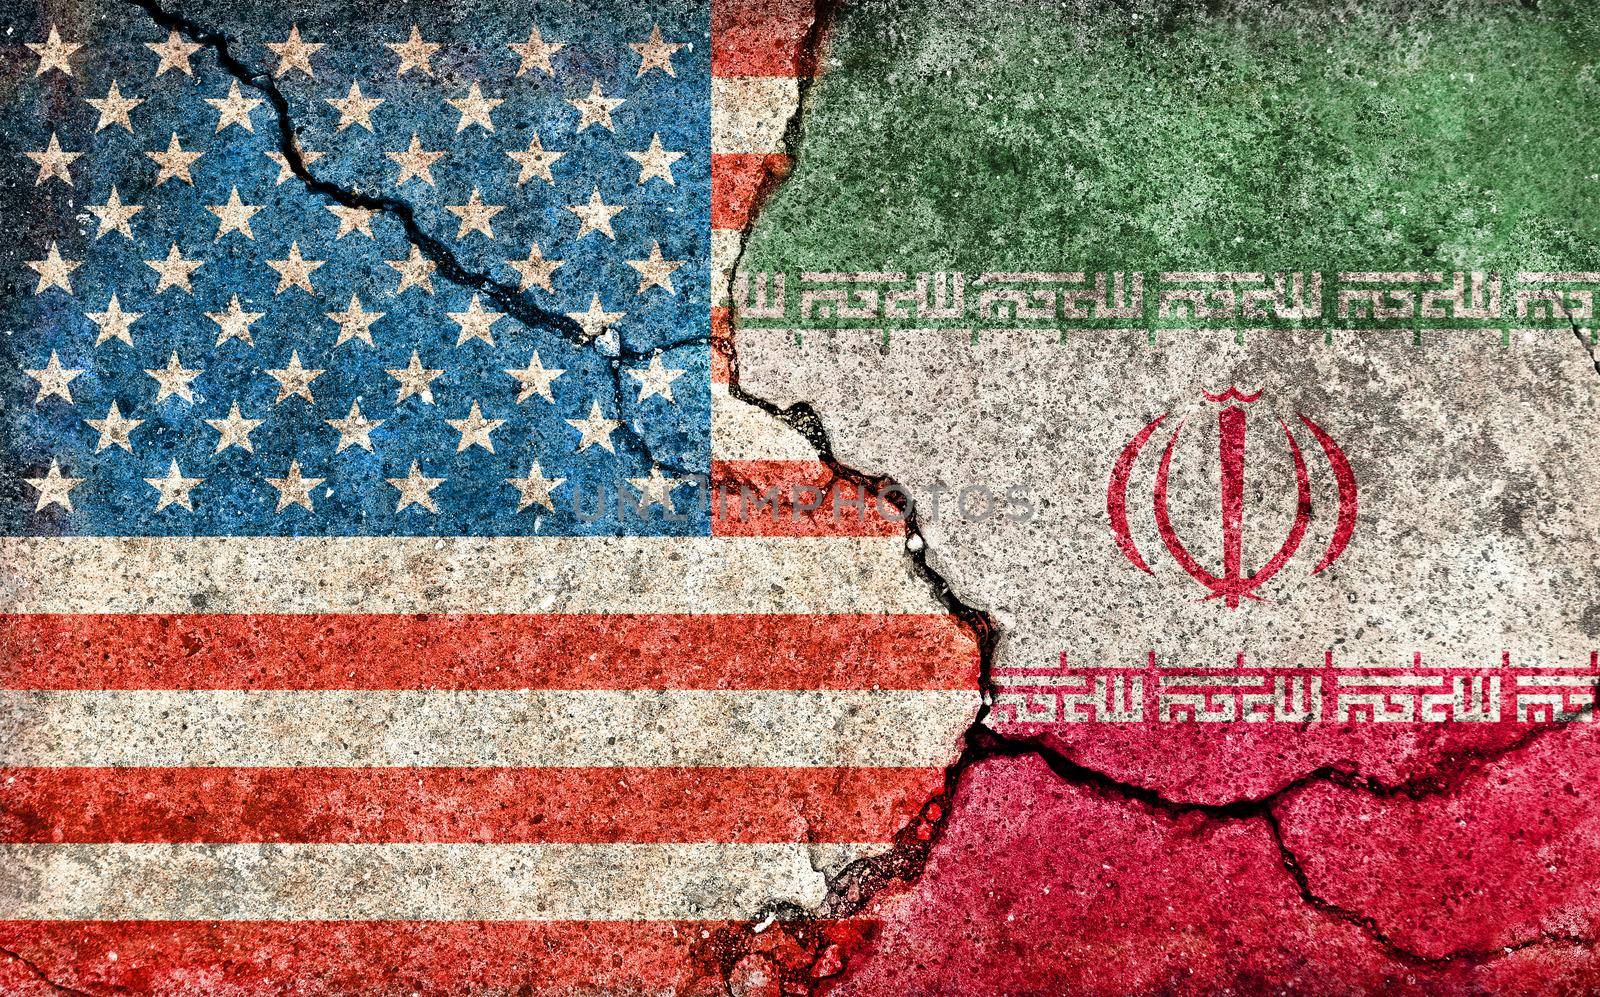 Grunge country flag illustration (cracked concrete background) / USA vs Iran (Political or economic conflict)